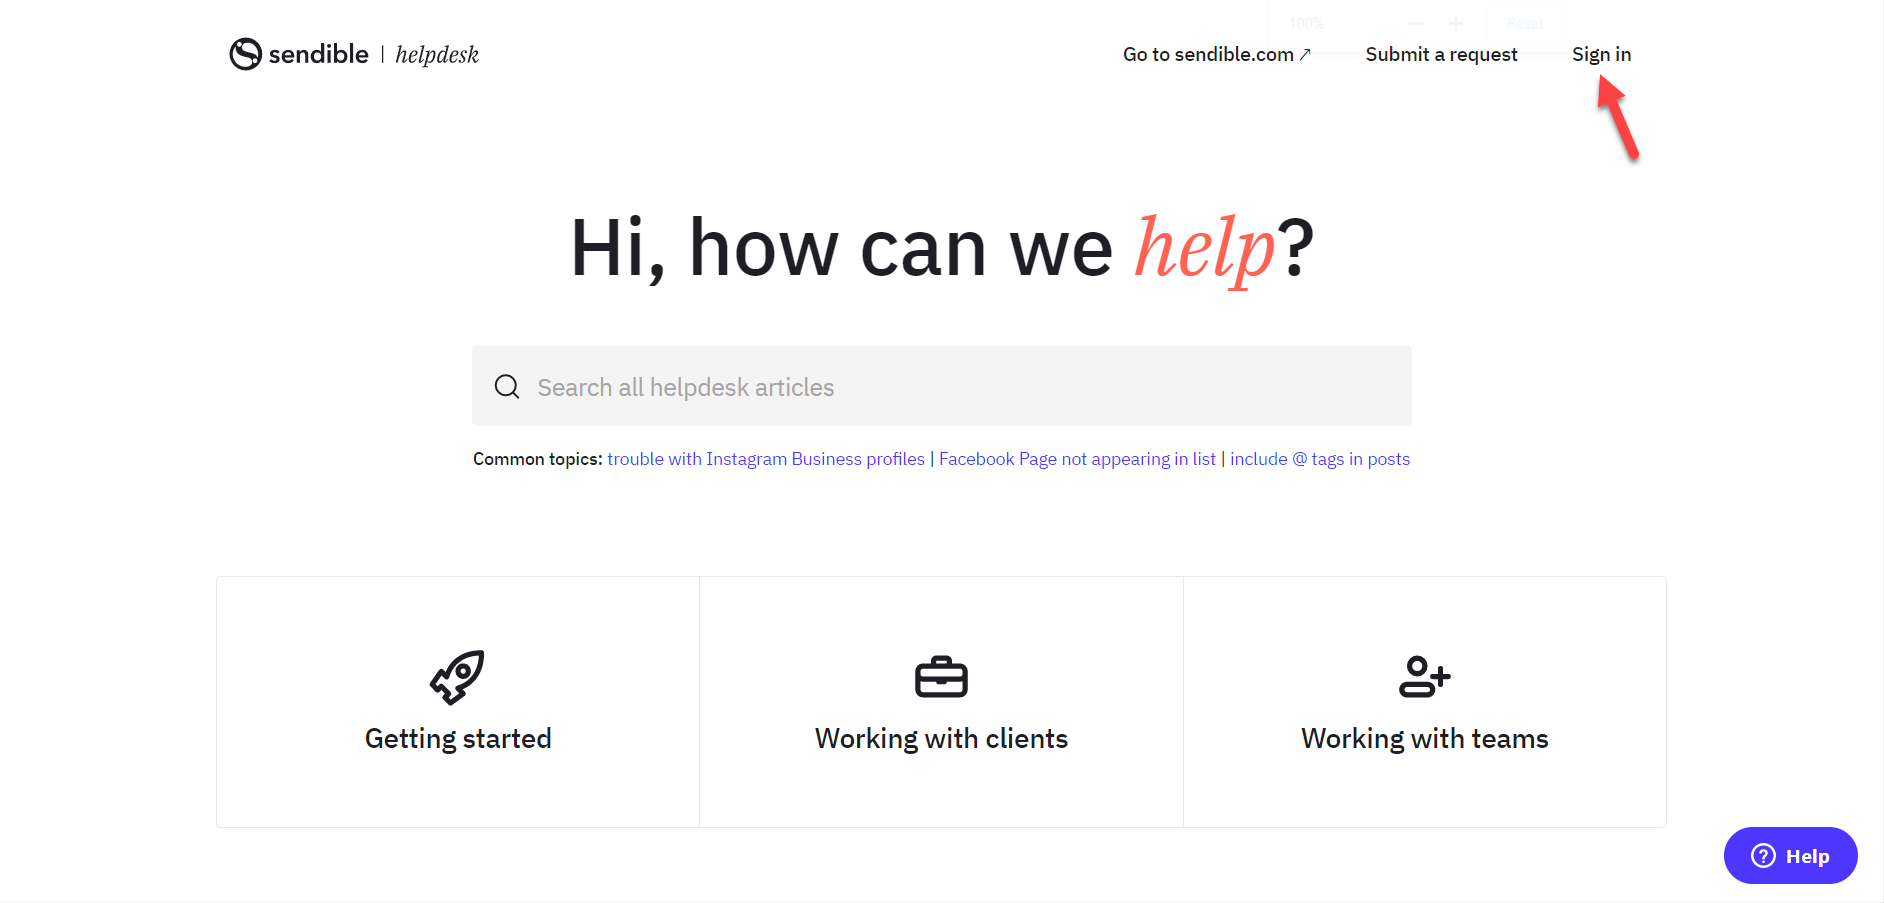 The sign in option on the top right of the helpdesk is pointed out with an orange arrow